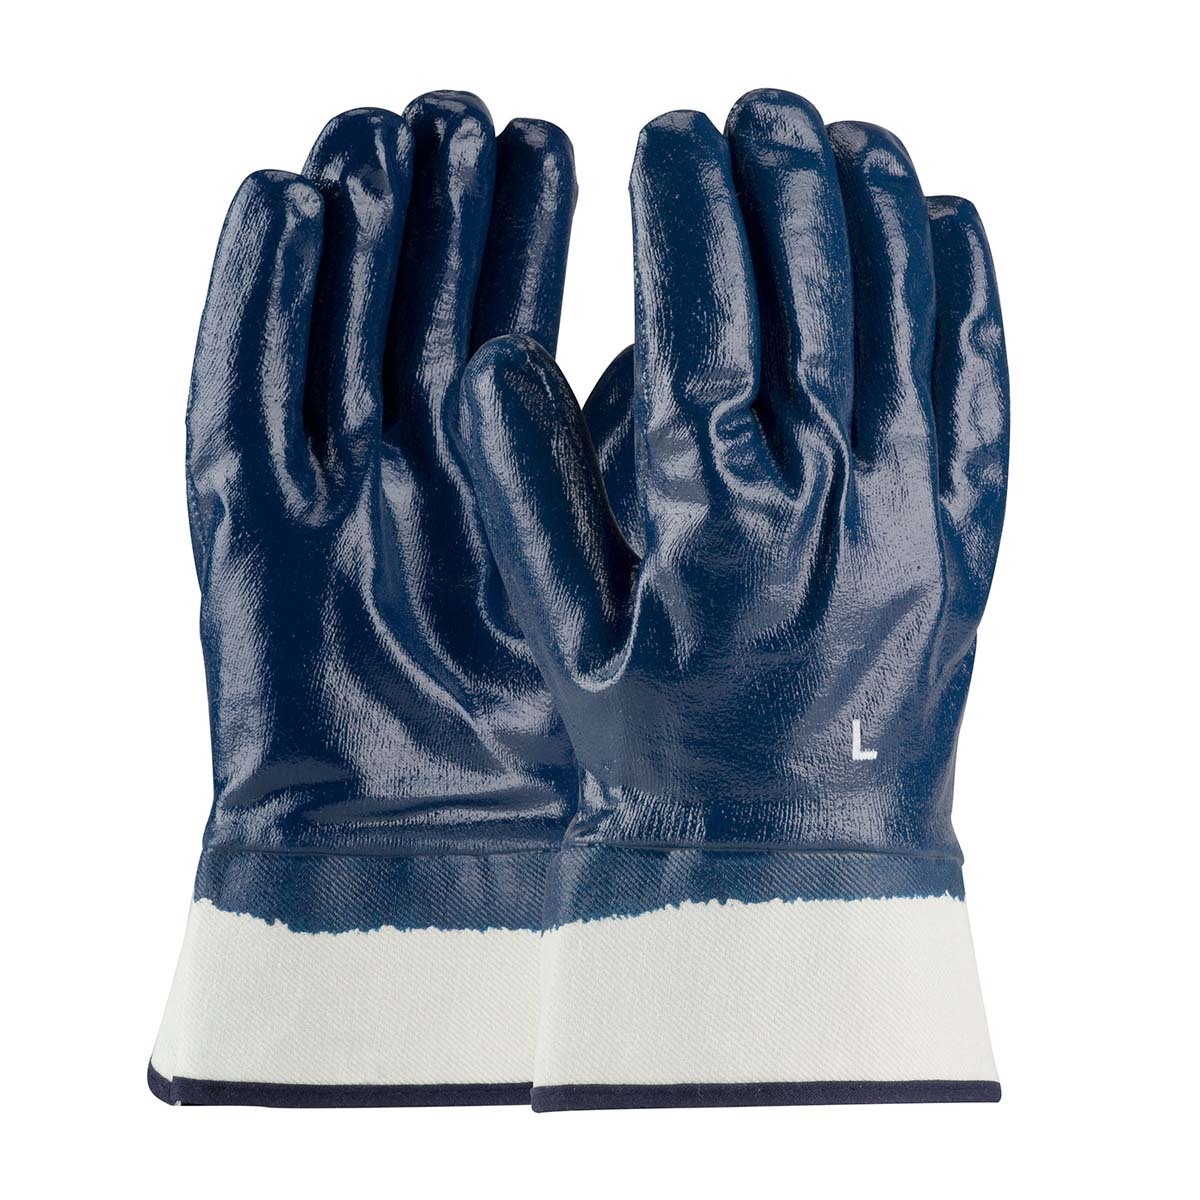 PIP® ArmorTuff® Standard Blue Nitrile Full Coated Work Gloves With Cotton Liner And Safety Cuff